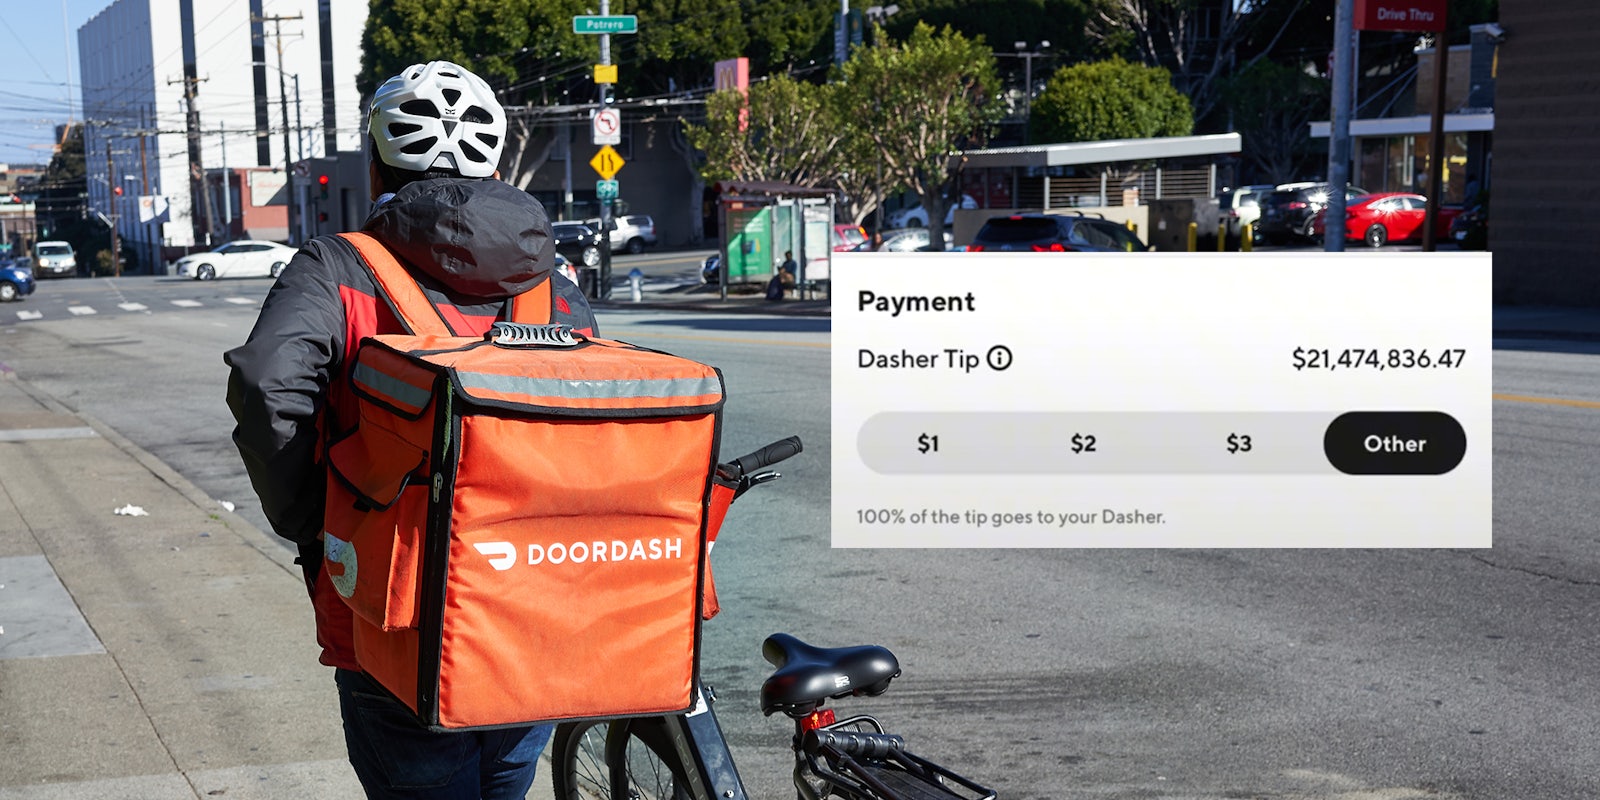 A DoorDash delivery worker walks his bike with Payment/Dasher Tip reading $21,474,836.47